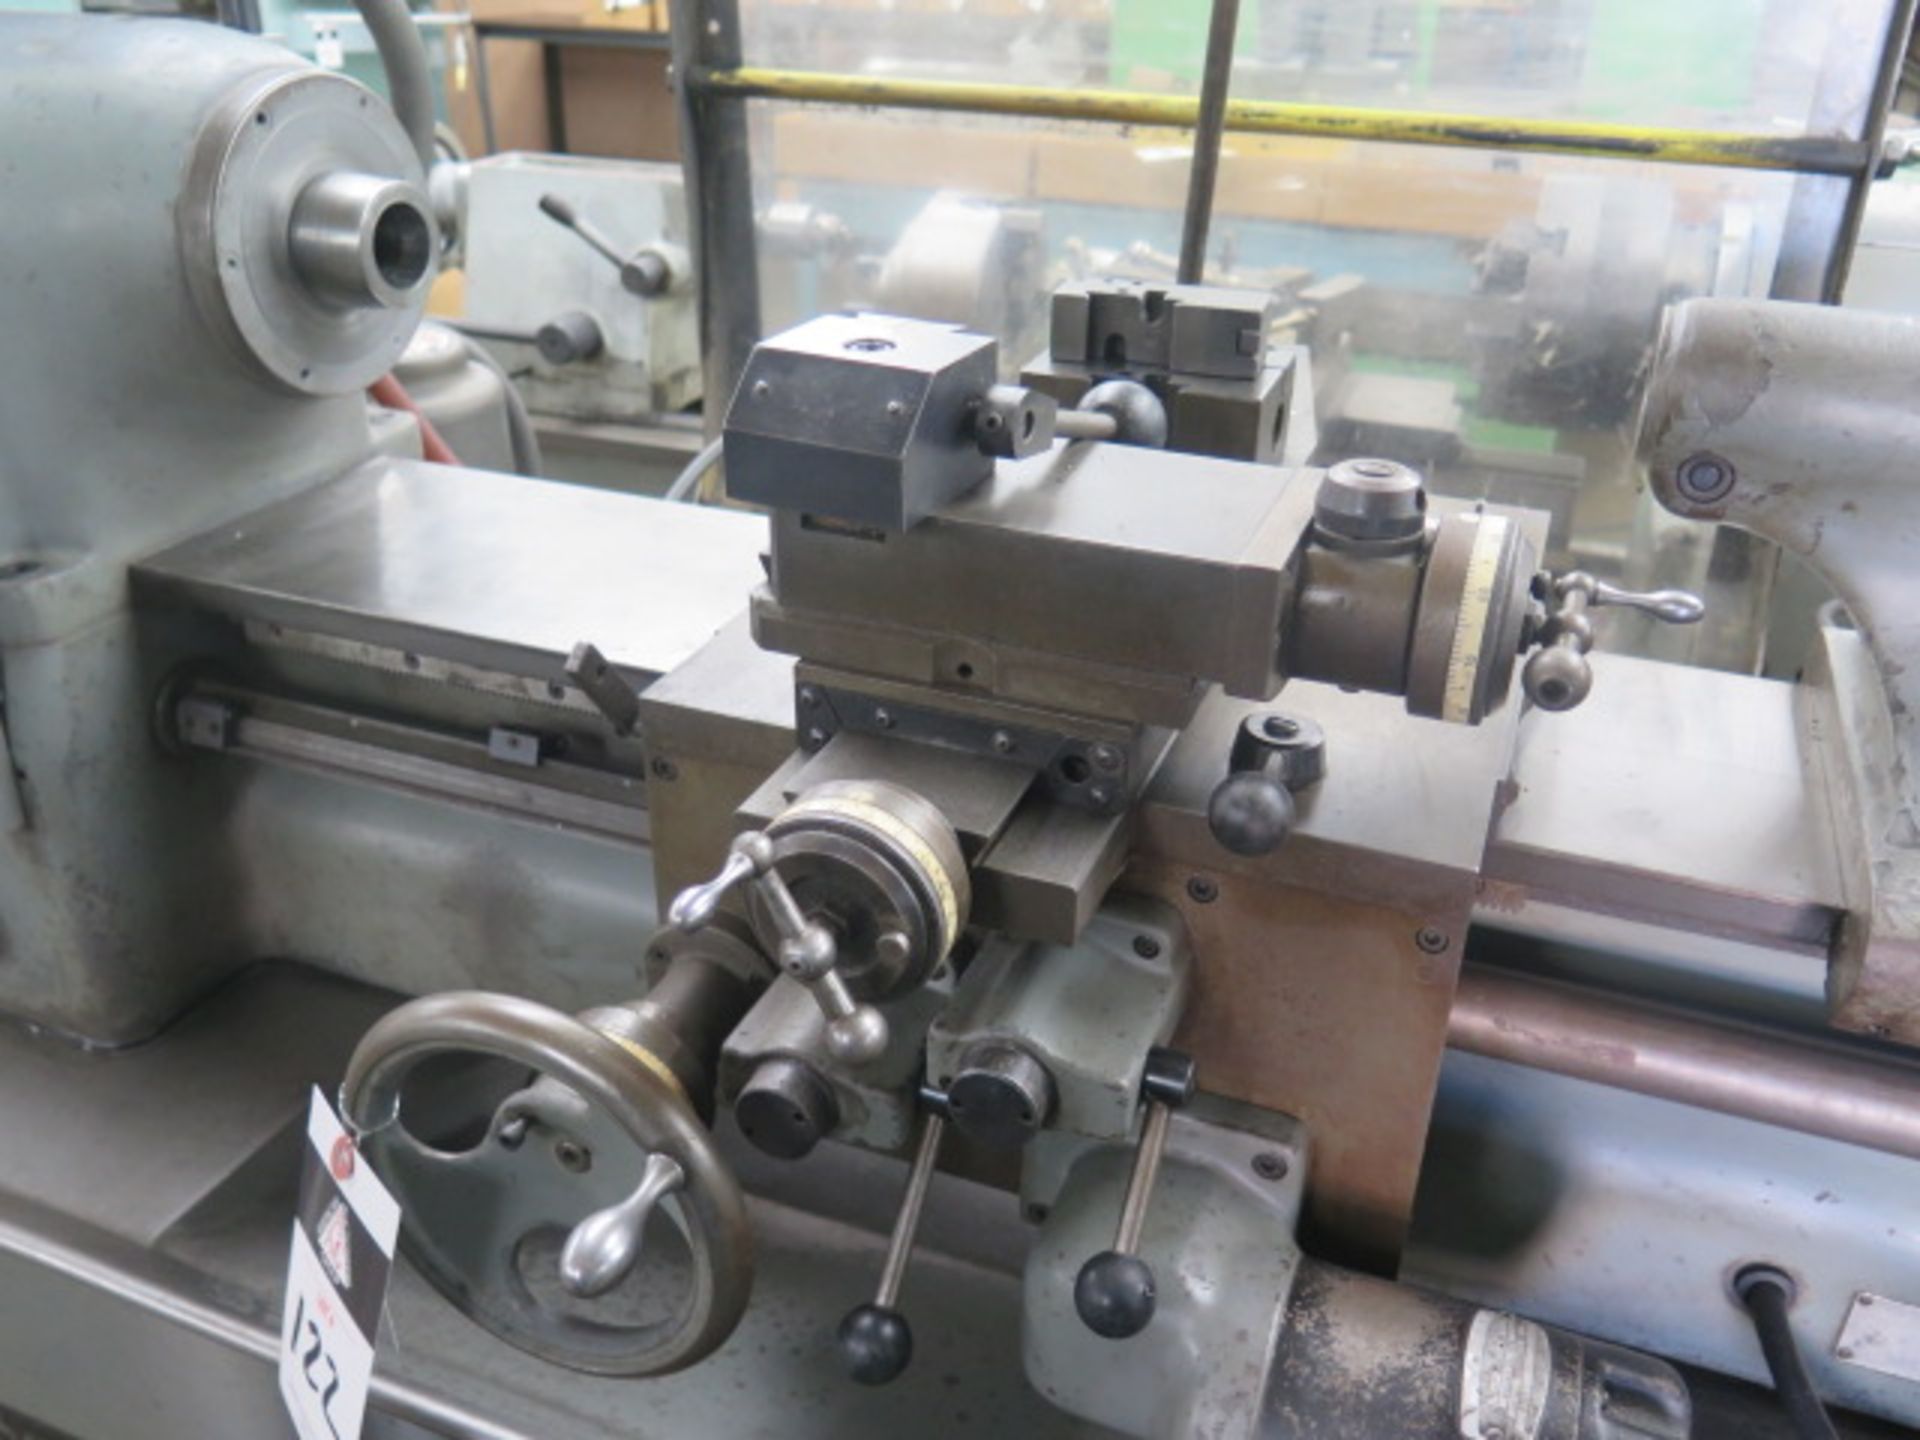 Hardinge TFB-H Wide Bed Second OP Lathe w/ 125-3000 RPM, Tailstock, Power Feeds, KDK, SOLD AS IS - Image 8 of 13